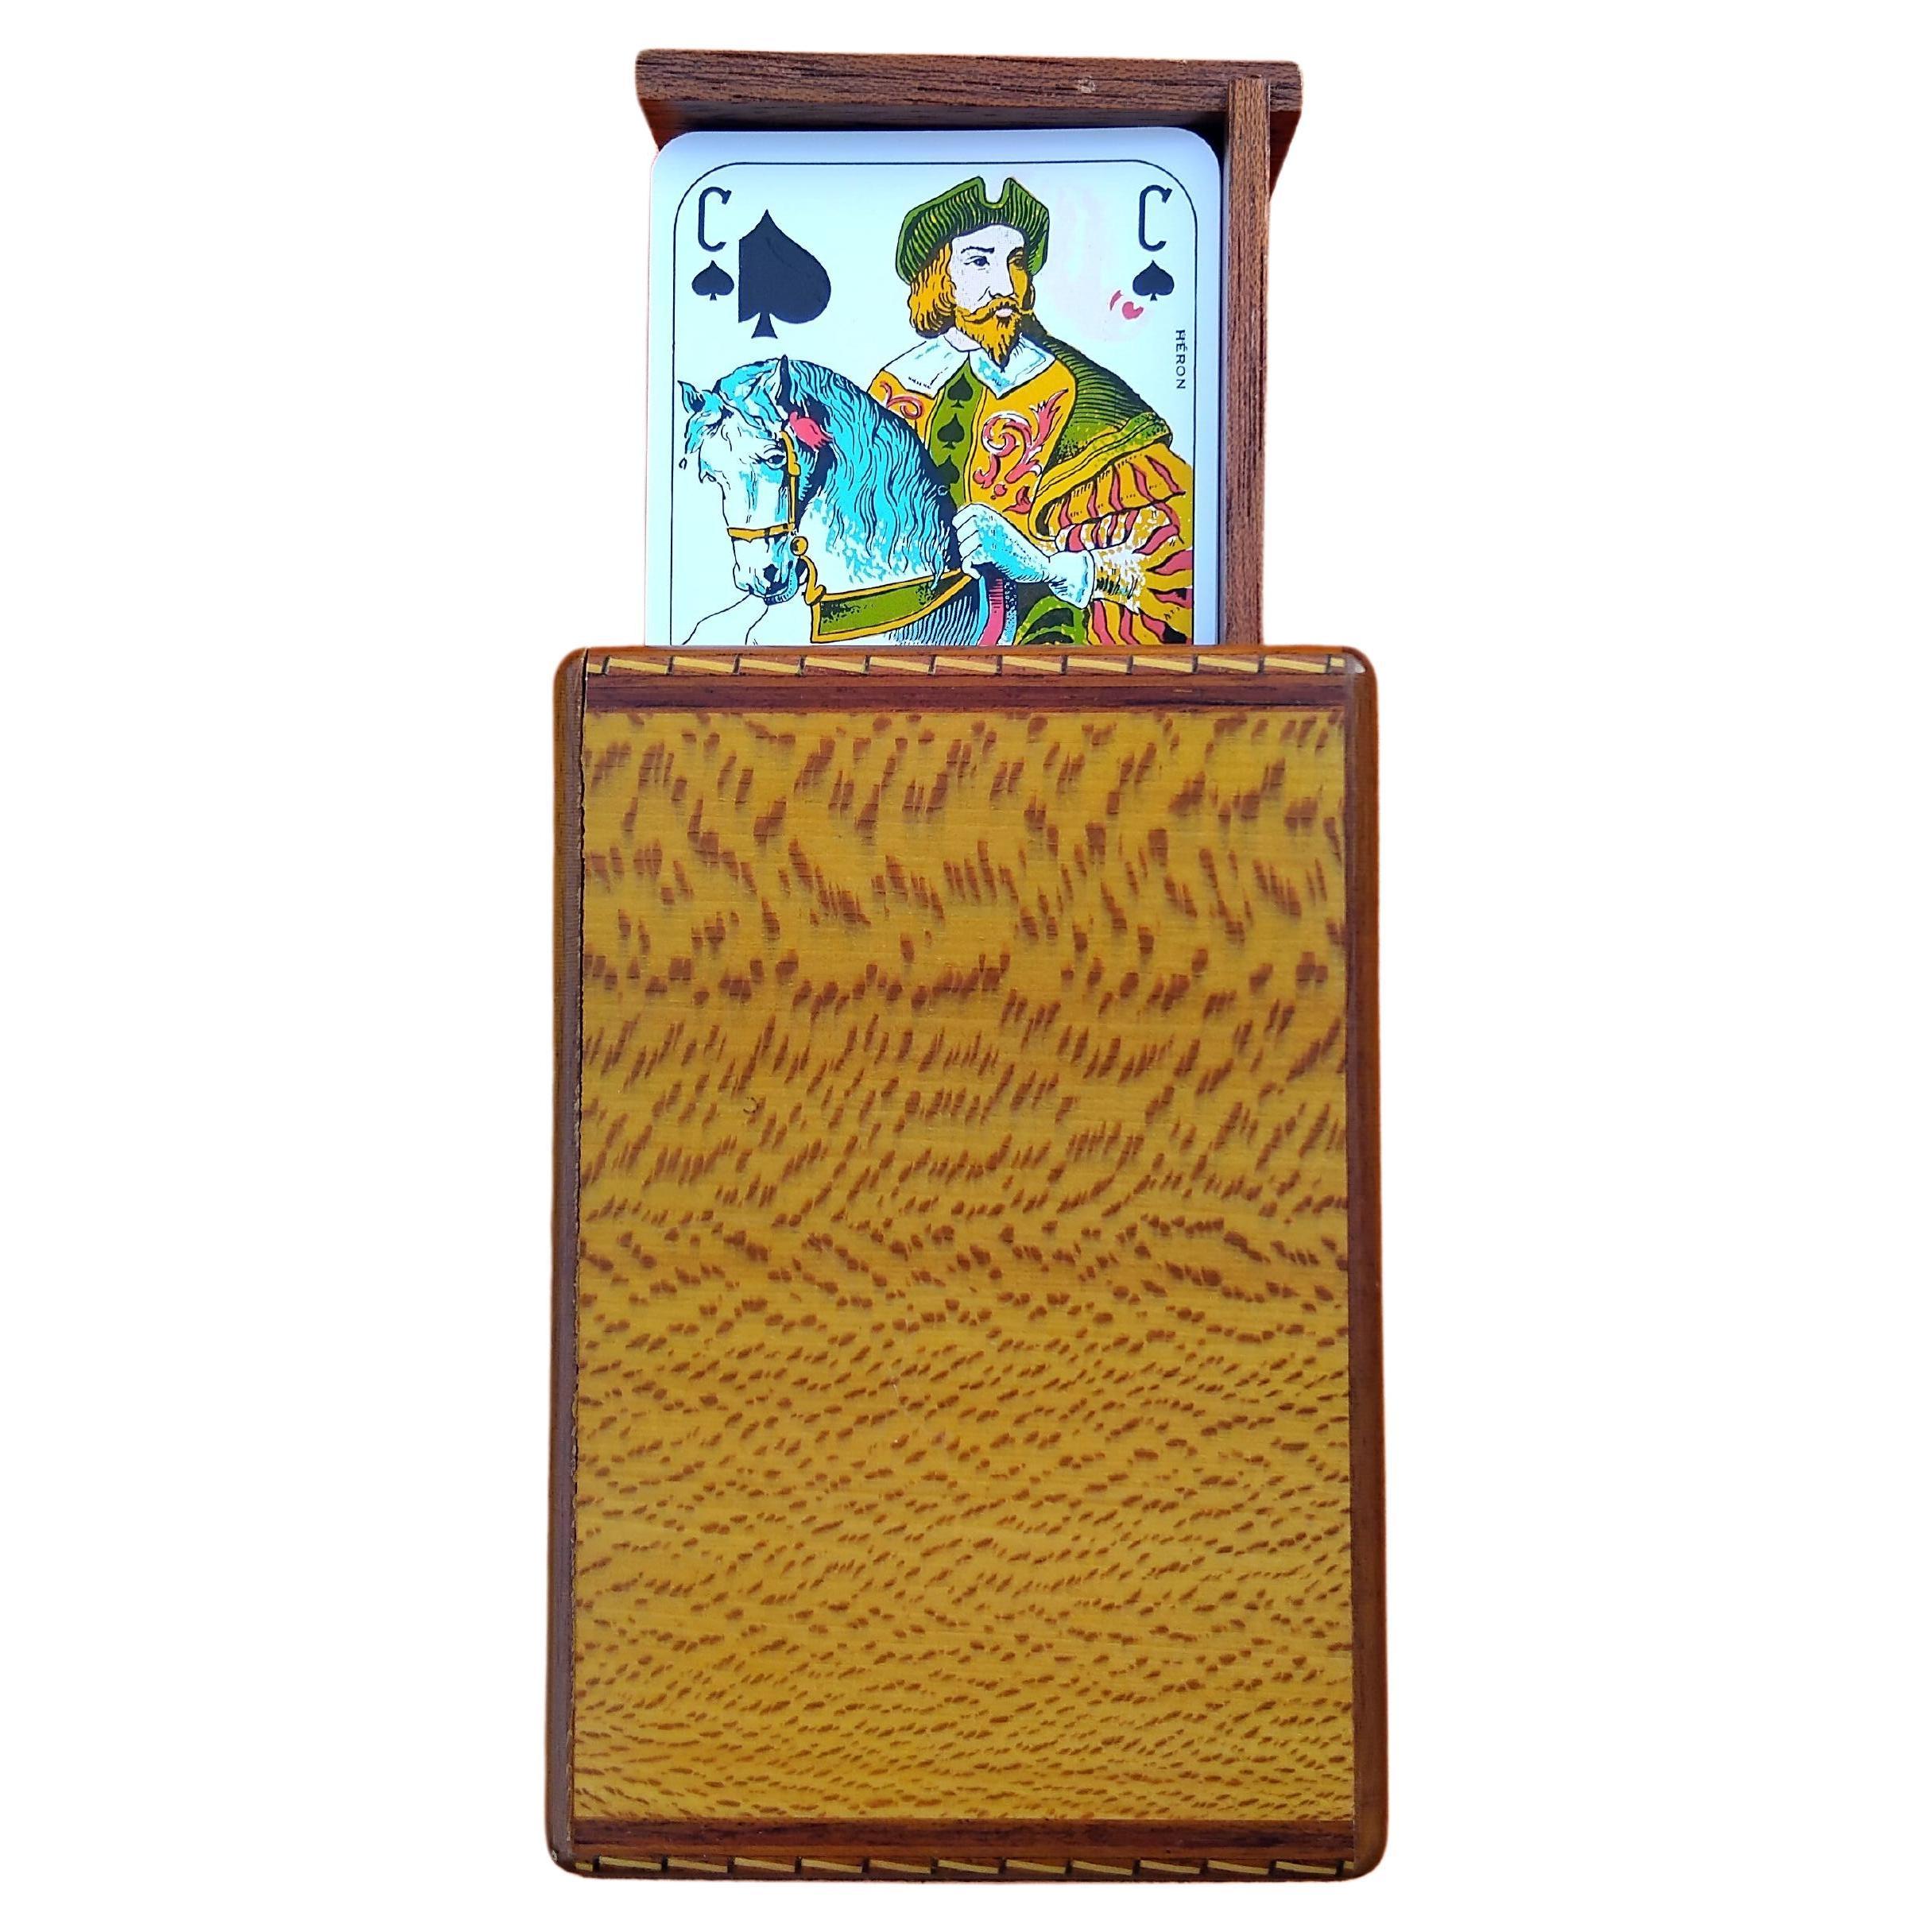 Please note: cards seen on photo are for display purpose only. Not included in the sale

Exceptional Authentic Hermès Playing Cards Case

Rare item, super chic ! 

Can hold a tarot deck of 78 cards measuring 6 cm by 11.2 cm

Made in France

Made of